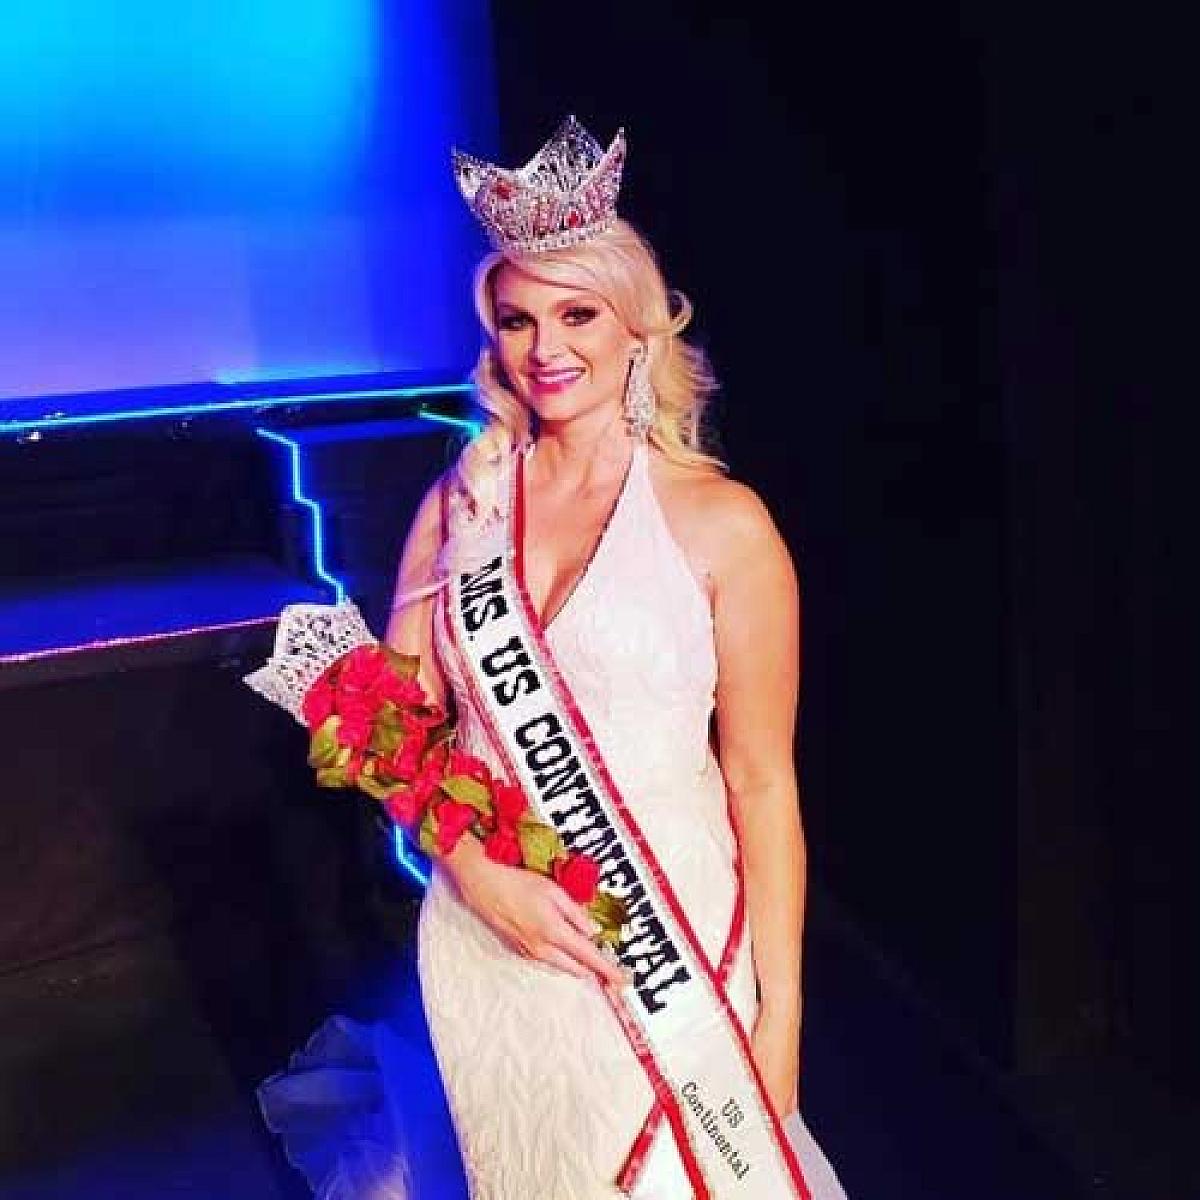 Stephanie Griffin with Ms. US Continental Crown and Sash